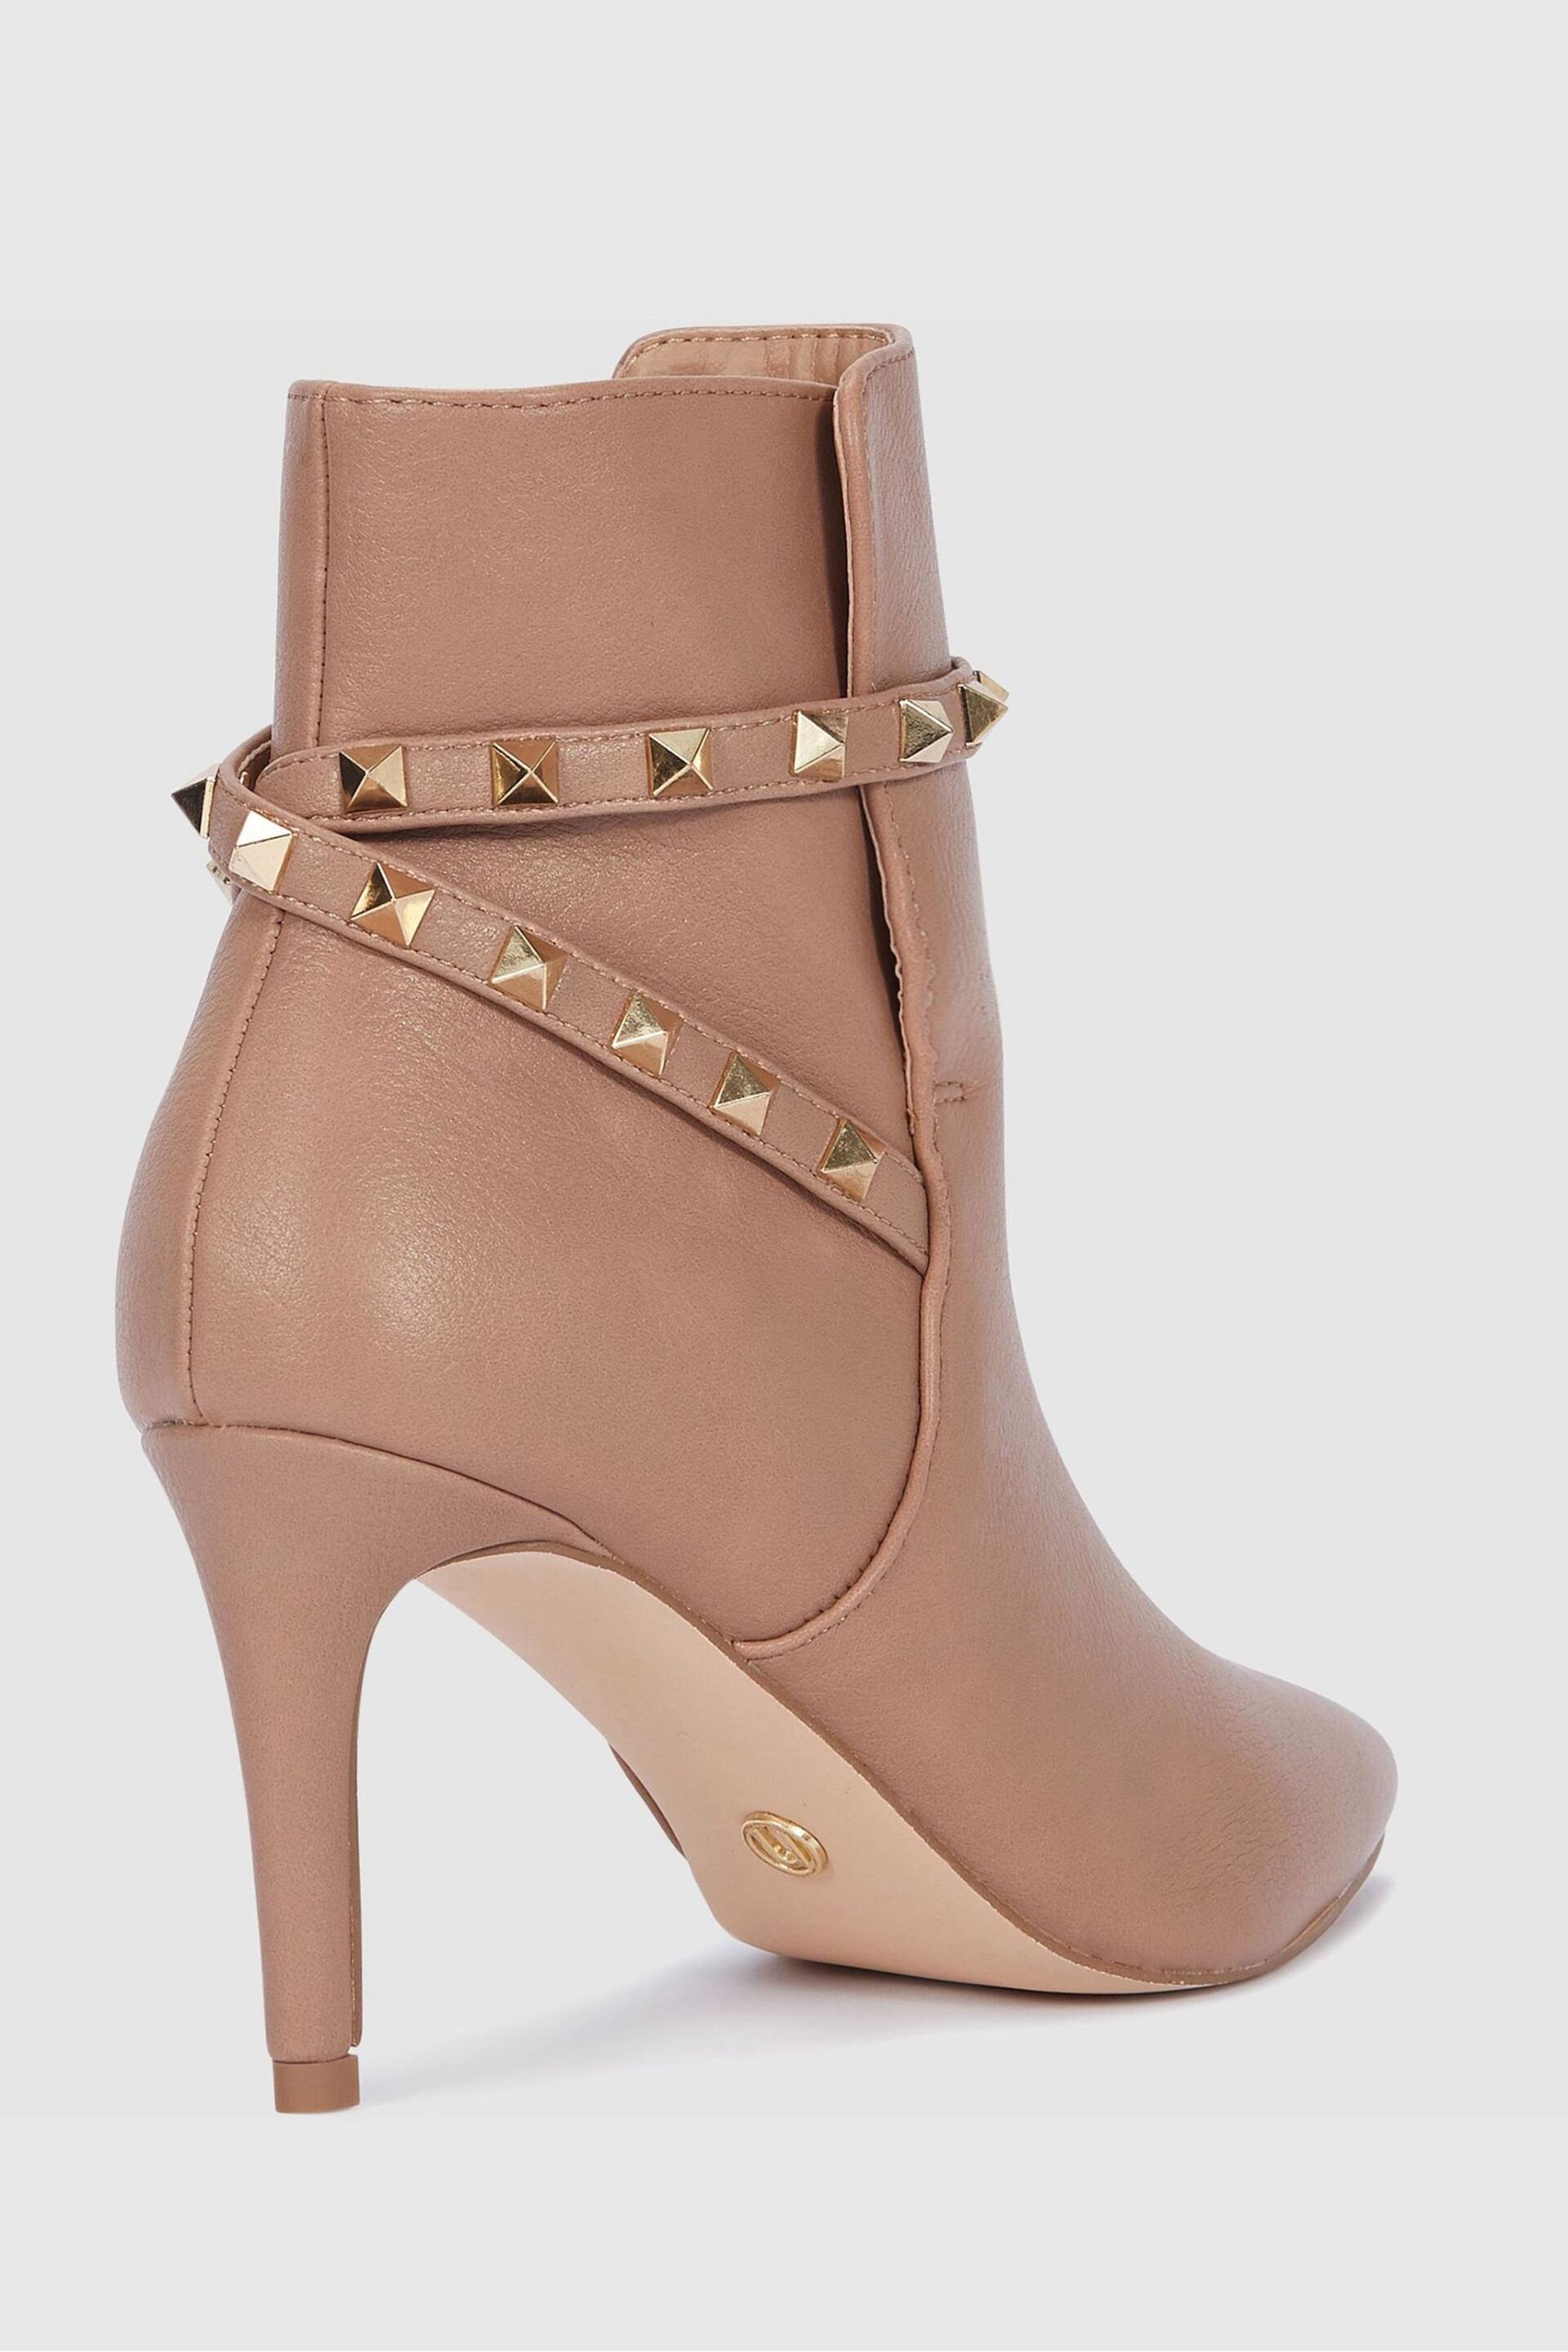 Novo Nude Diego Stud Detail Point Mid Stiletto Heel Ankle Boots - Image 3 of 4